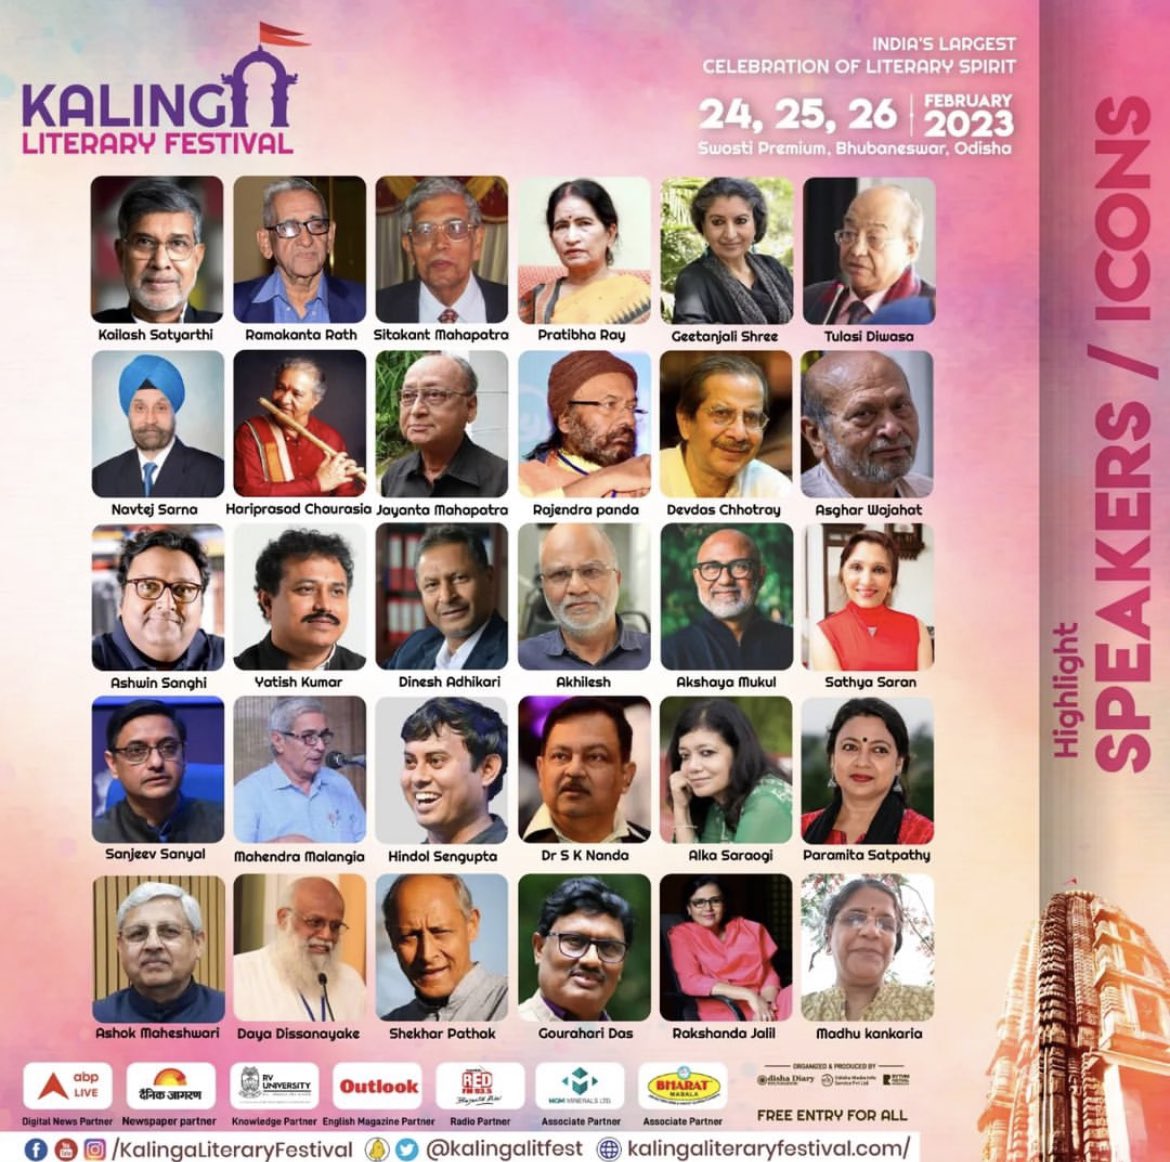 In august company!

Will see you all at the Kalinga Lit Fest with some of my dearest writers and colleagues from publishing.

24-26th of February 2023!

In the city of Bhagwan Jagannath 🙏🏻 
With the @kalingaliteraryfestival team

#litfest #authors #literarylife